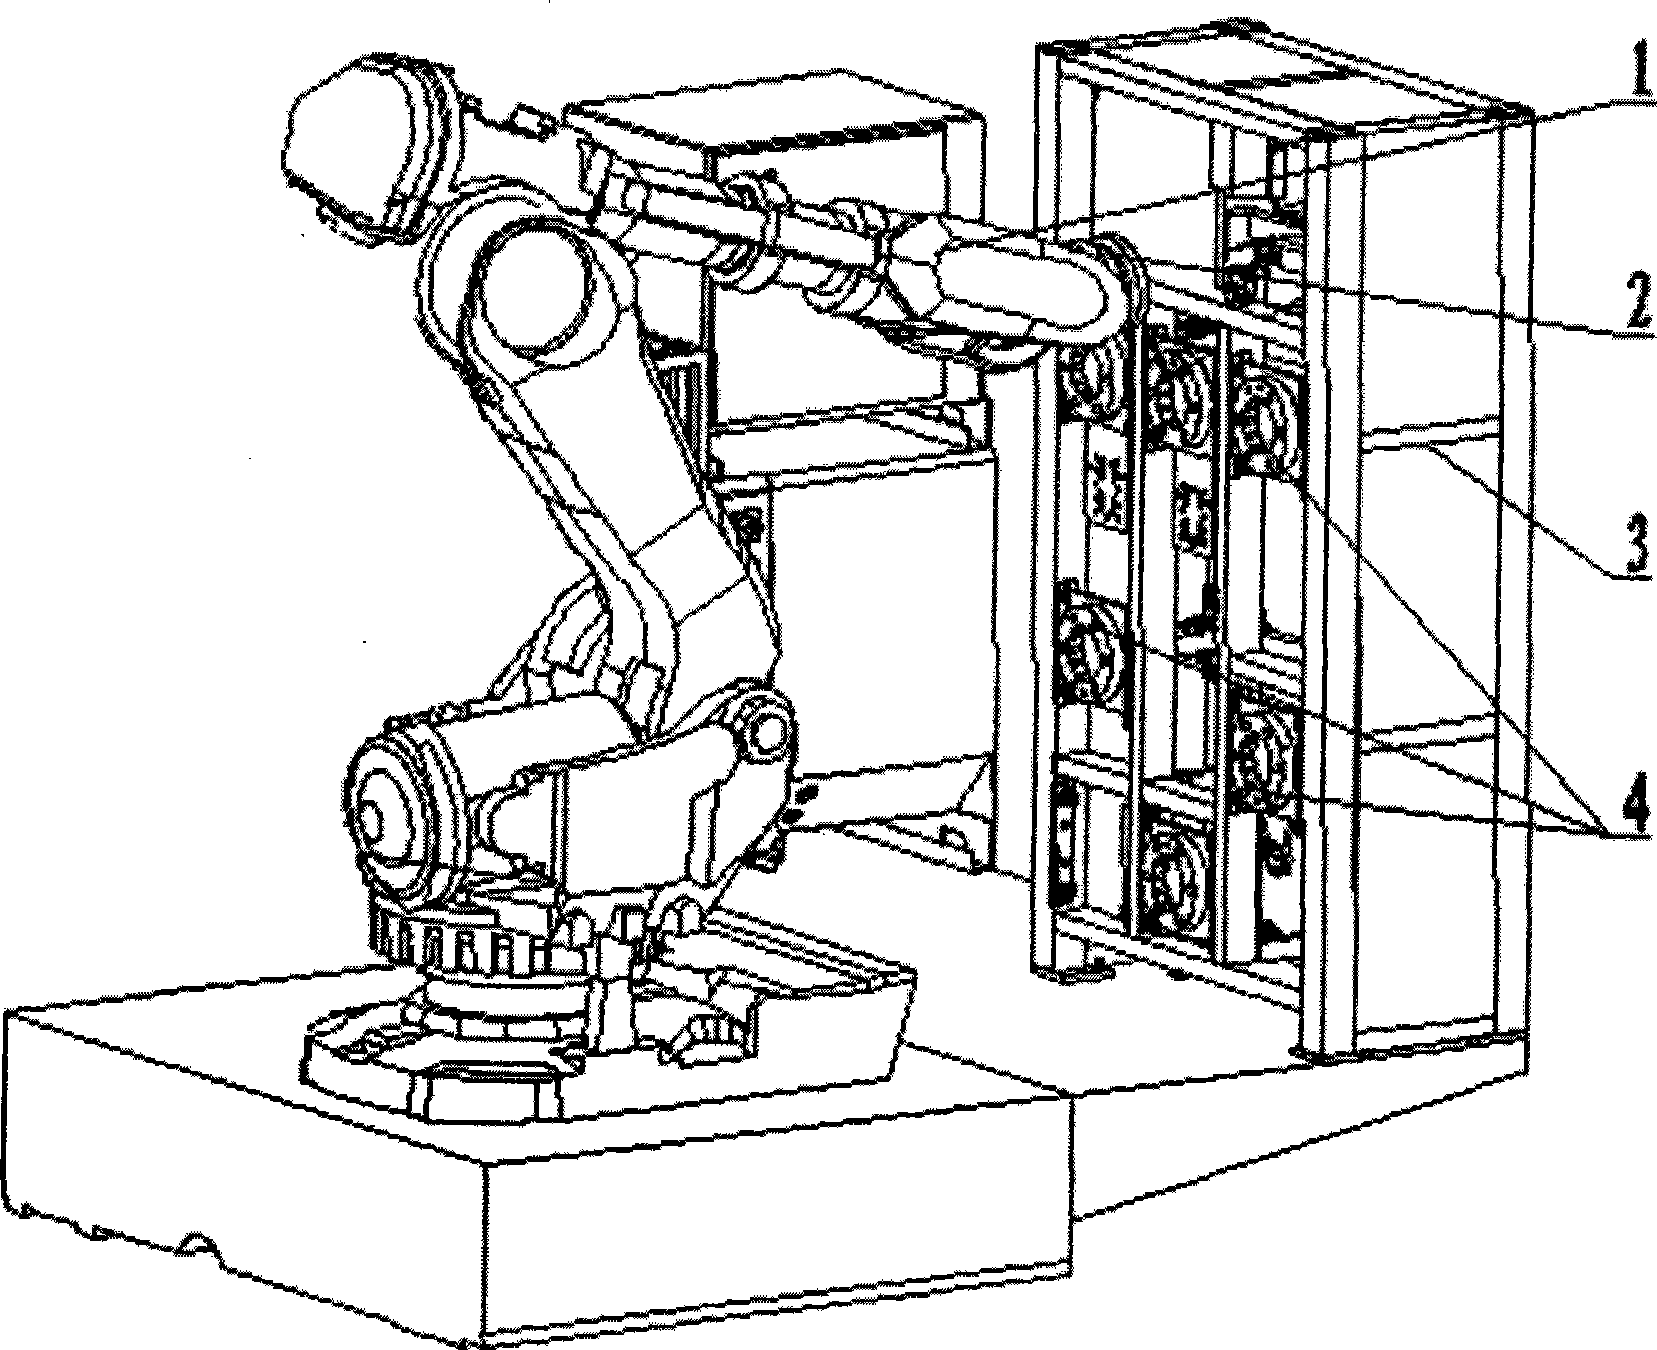 Aircraft system member mounting method and apparatus based on industrial robot